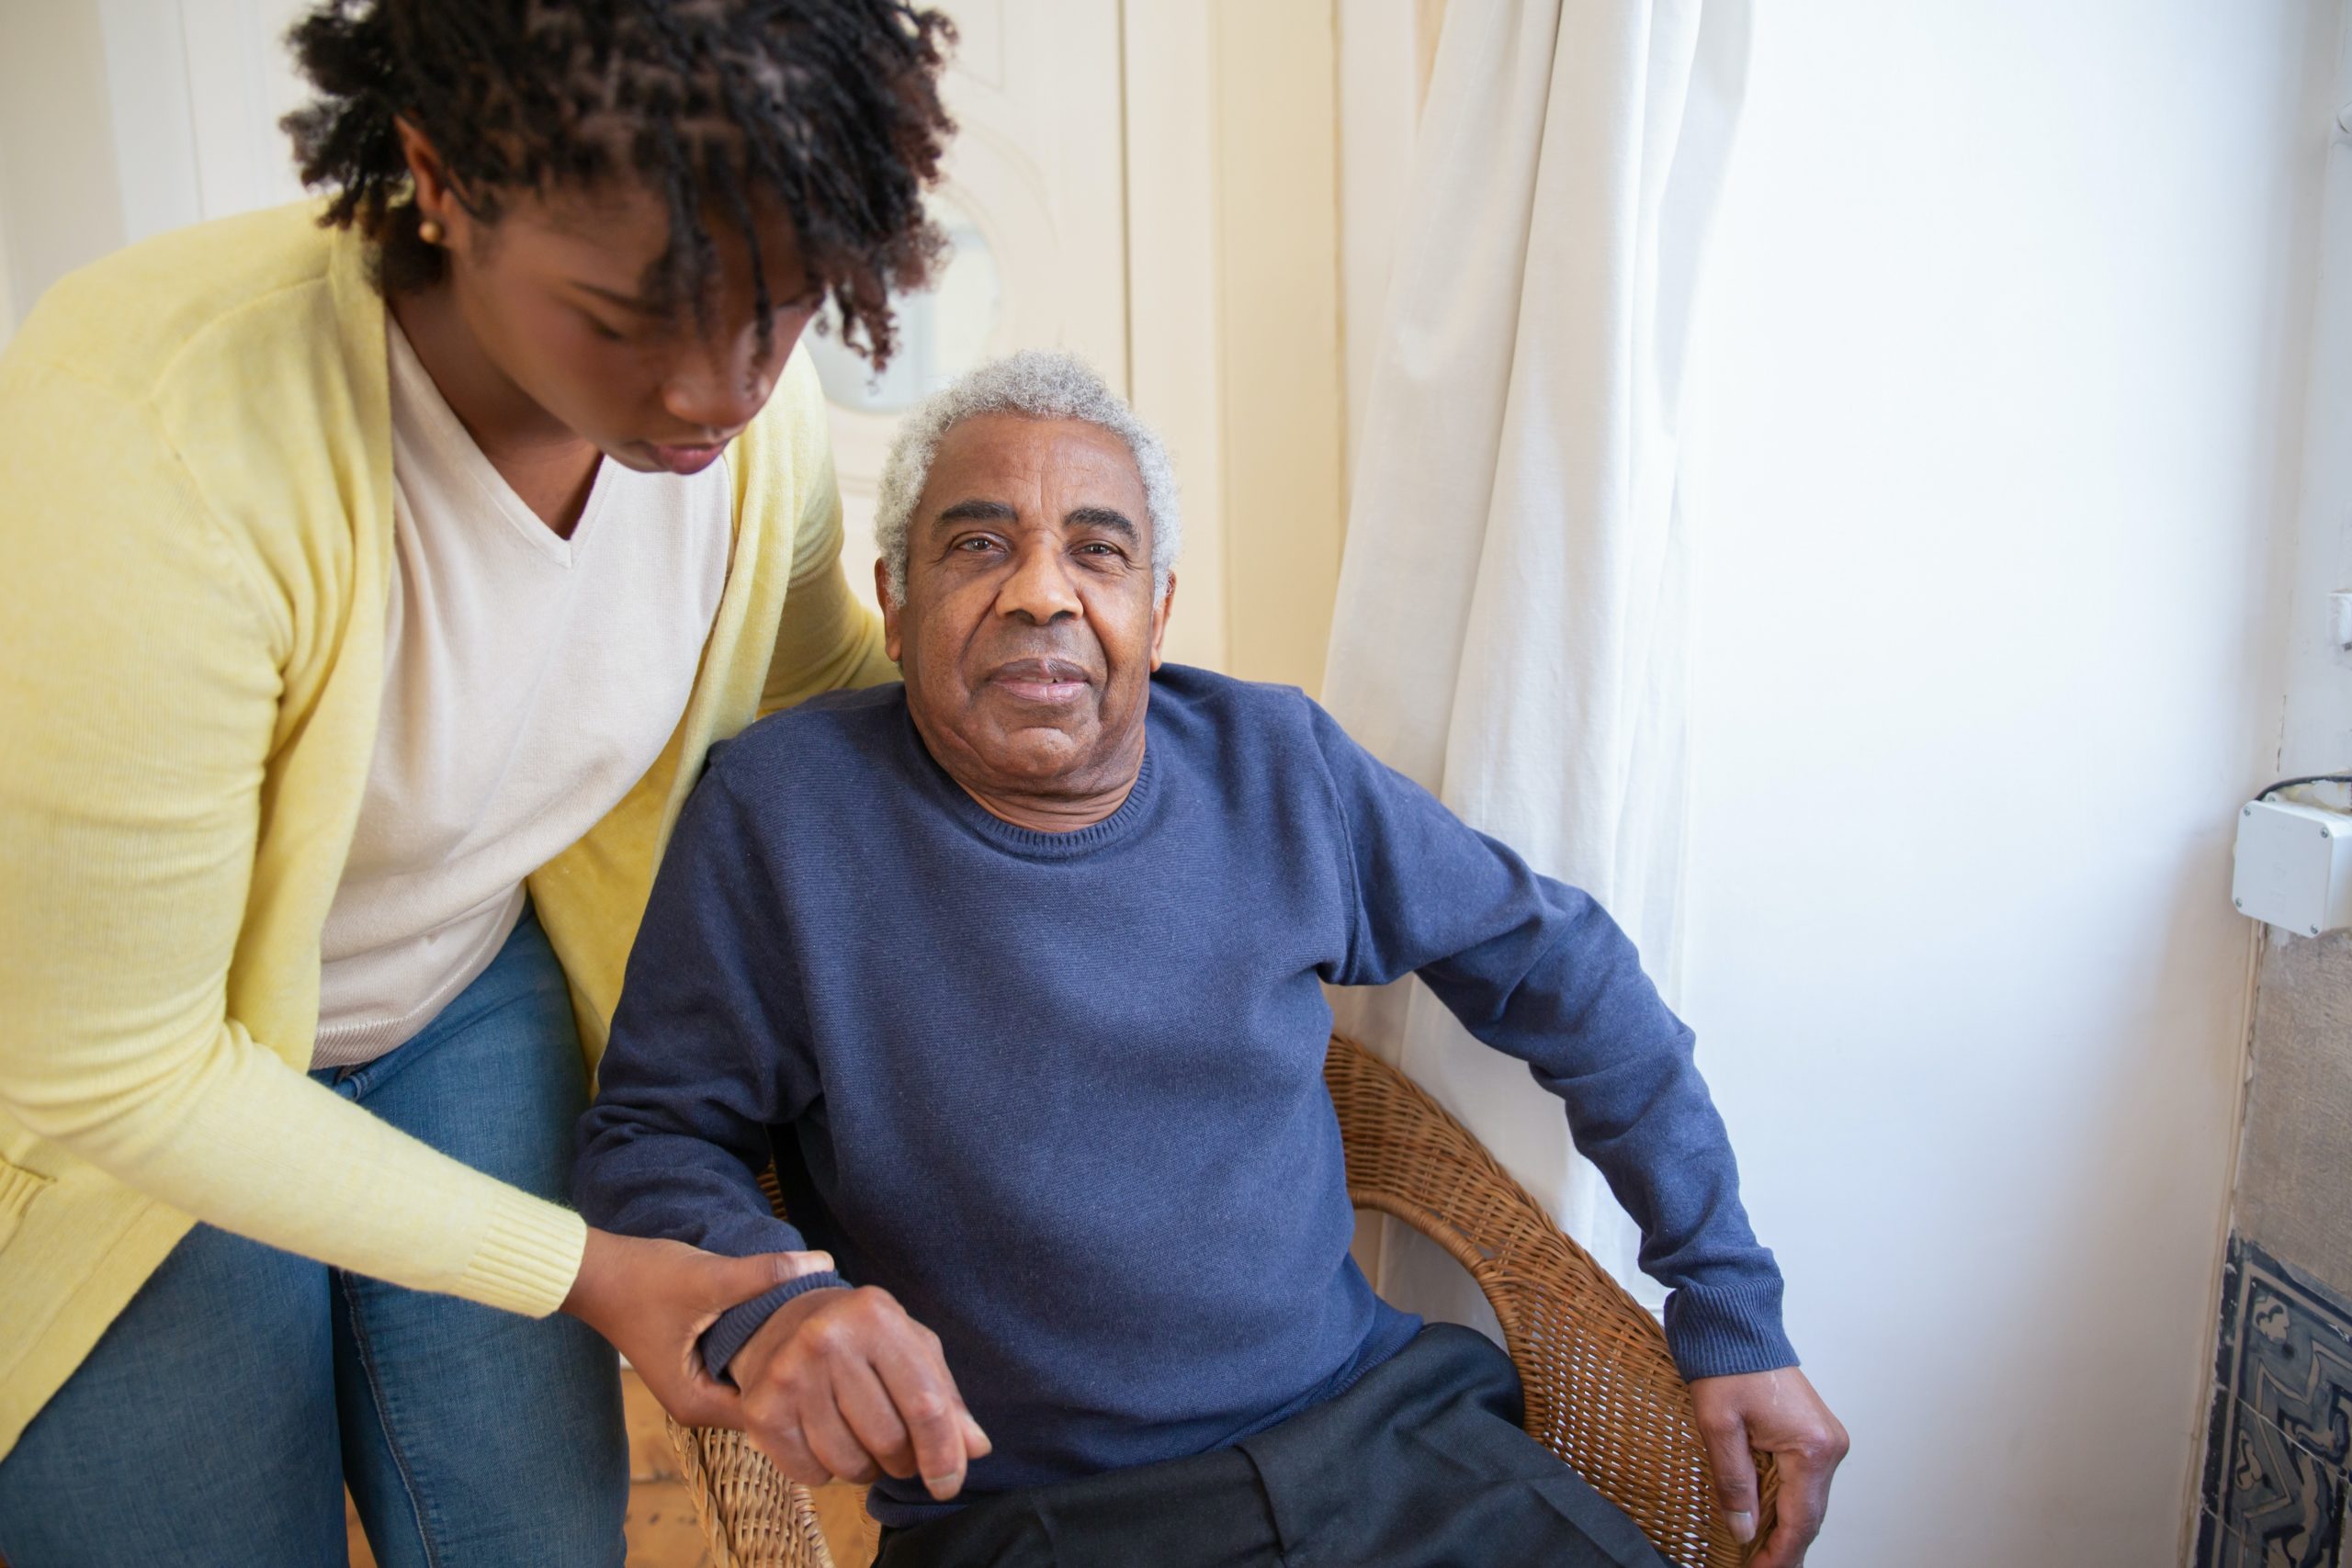 This picture depicts a Medicare recipient receiving home health care.